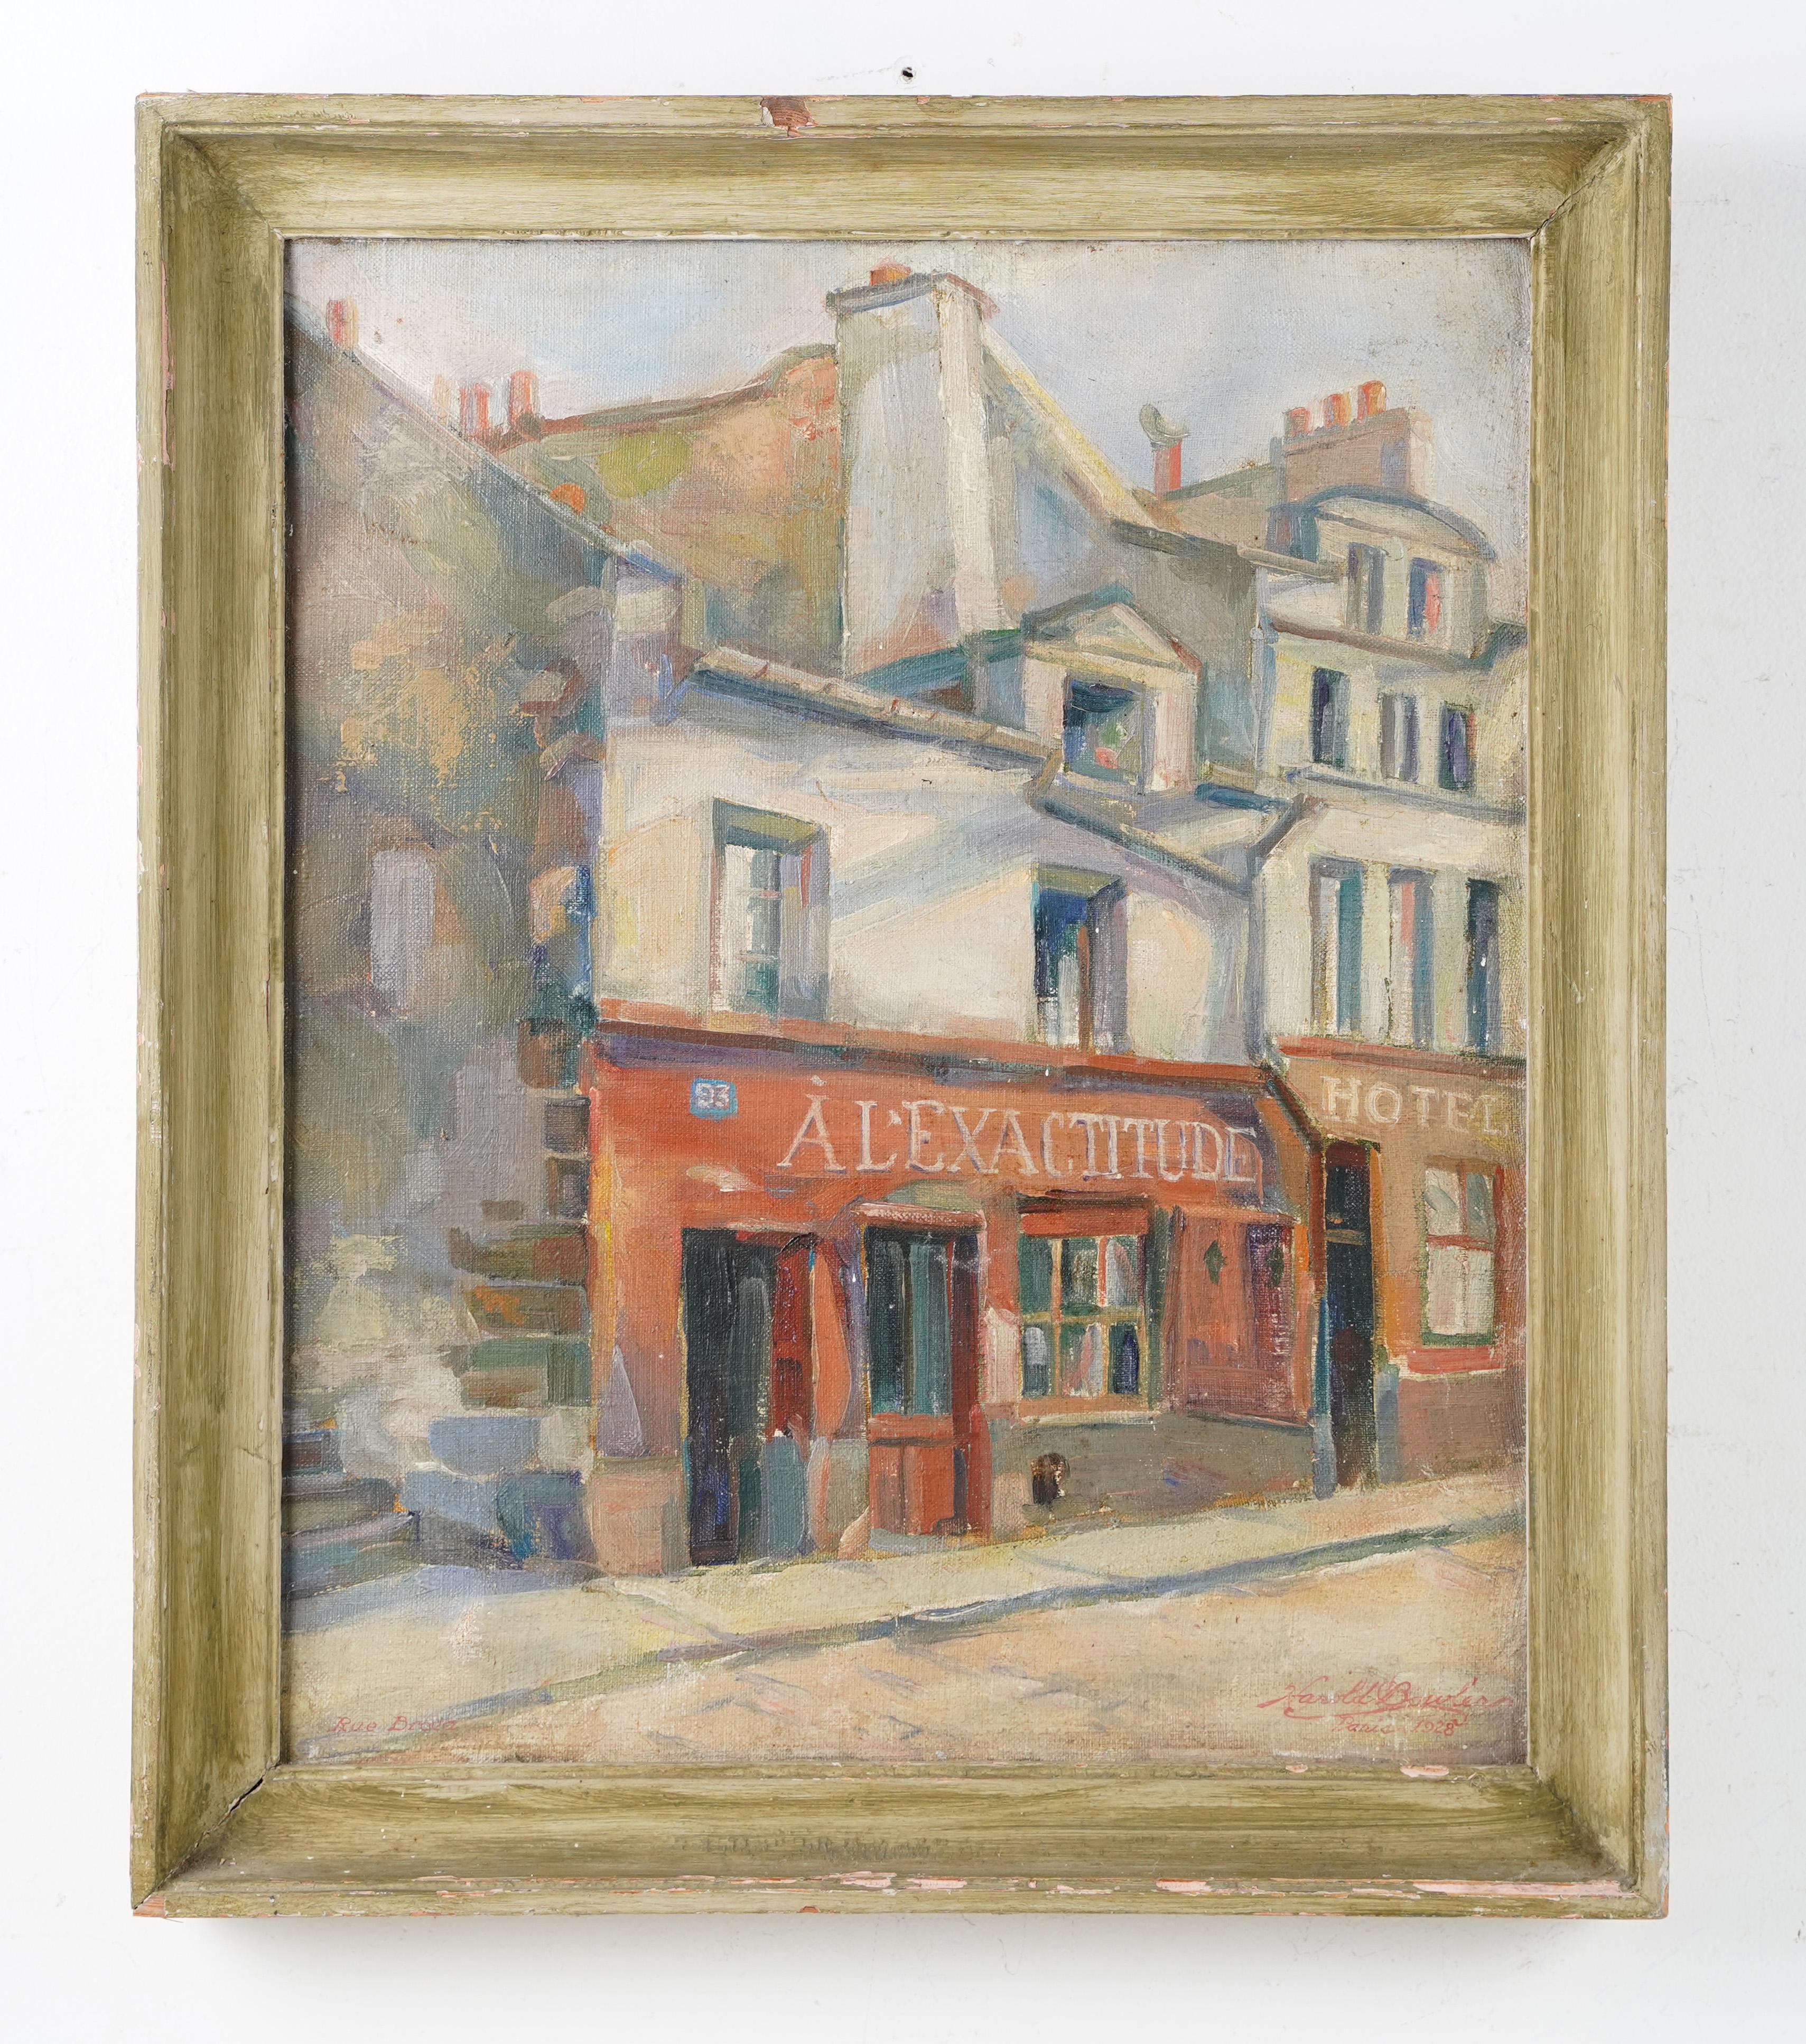 Antique American impressionist in Paris oil painting by Harold T. Bowler (1903 - 1965).  Oil on canvas.  Signed.  Framed.  